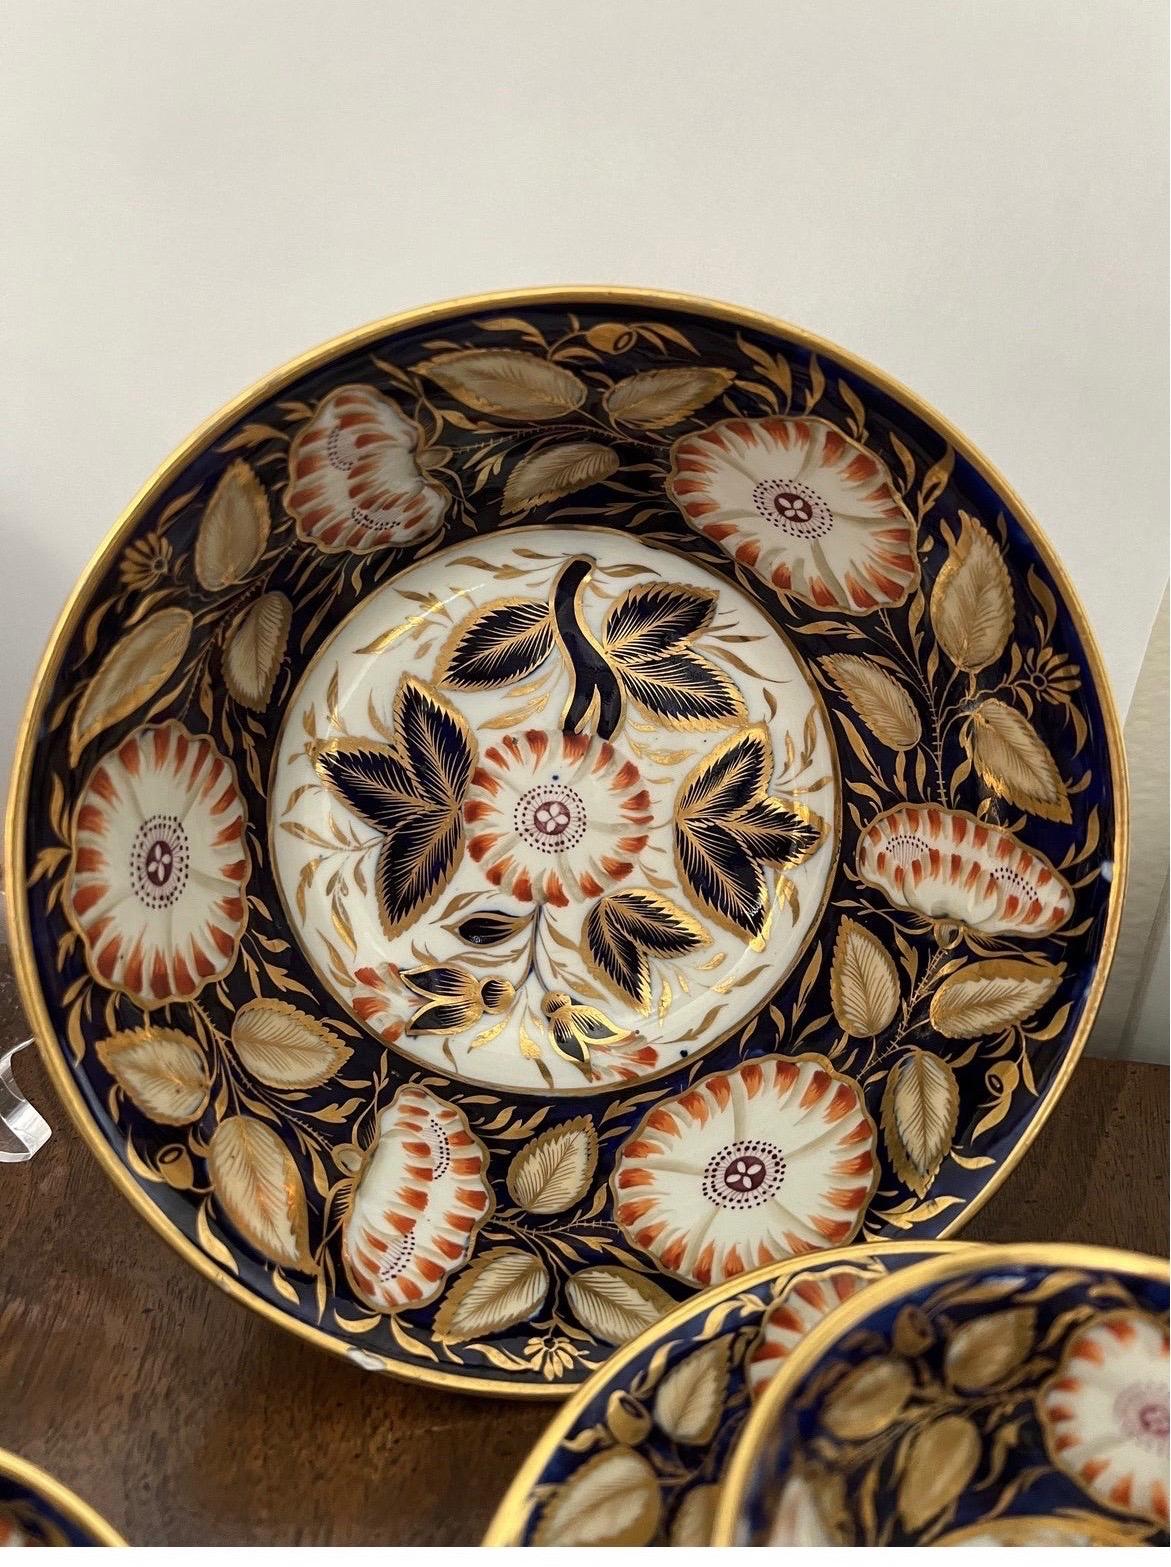 27 Pc, Fine Set of 19th Century English Porcelain Dessert Service Cobalt. 

Unfortunately I have been able to identify the maker or pattern. However, they are of fantastic quality and decoration.

Included: 
6.75” W x 3” H waste bowl or berry